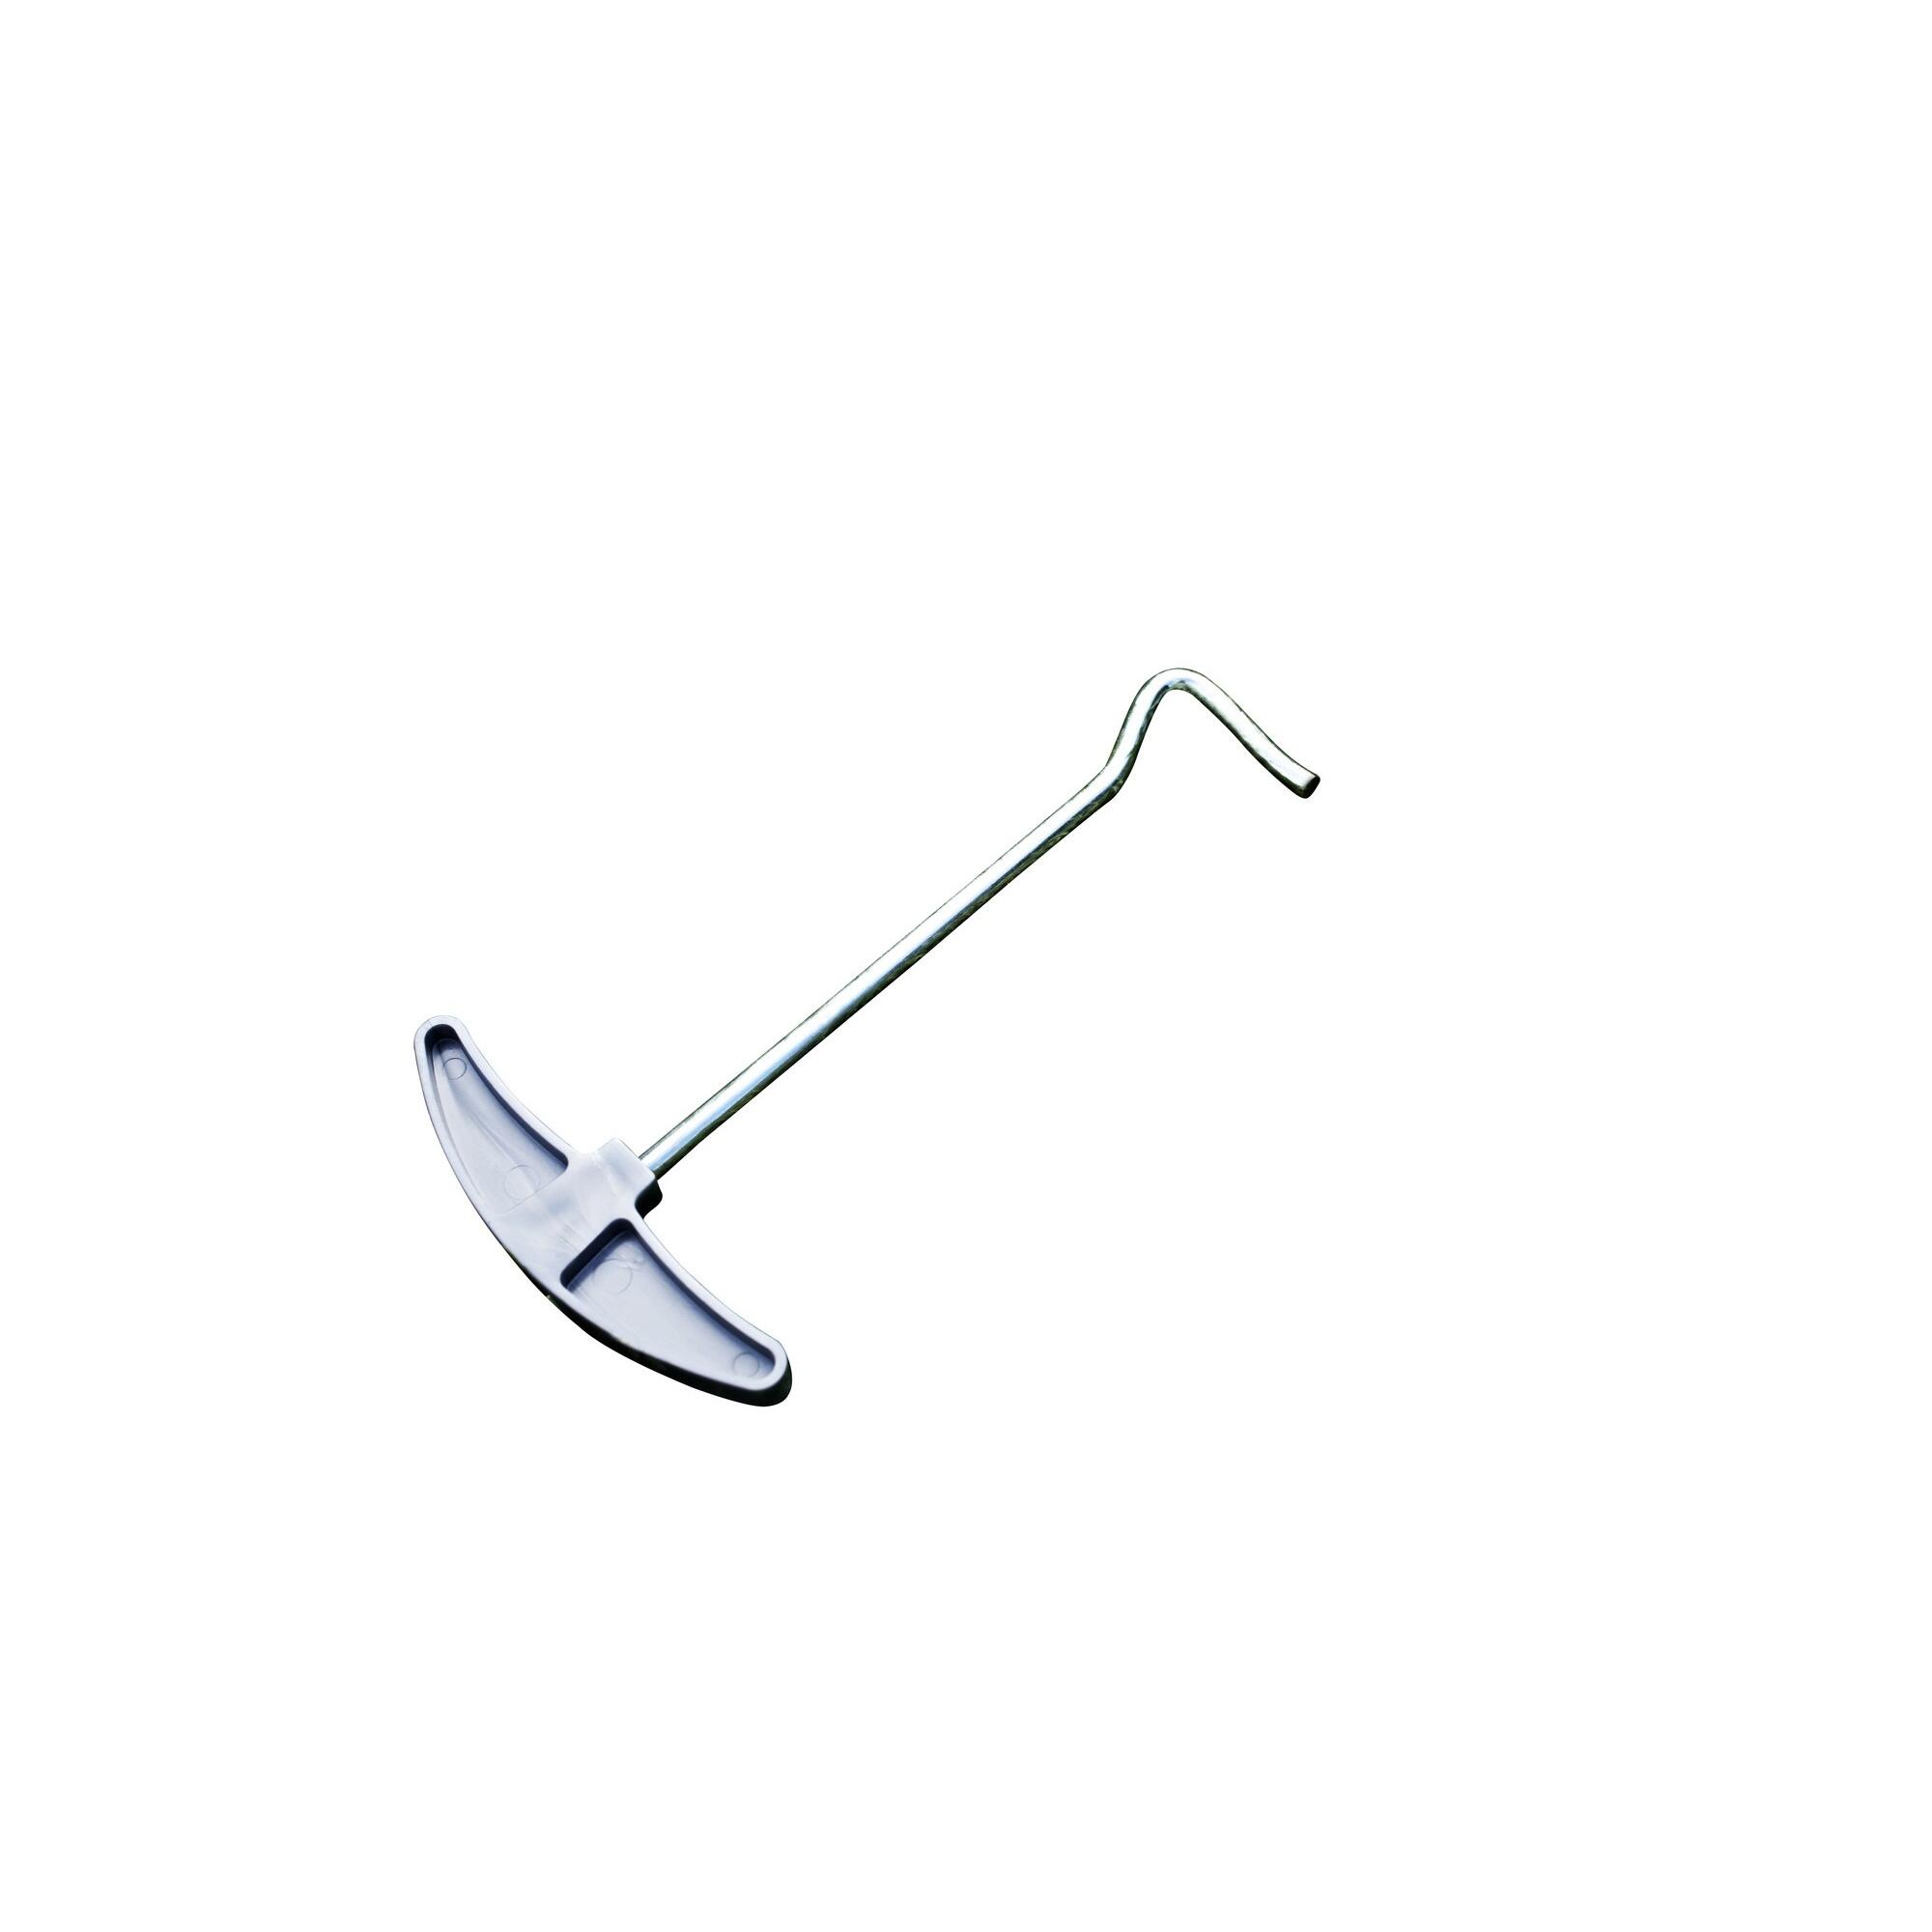 Great Outdoors Tent Peg Extractor Tool (Silver) 1/4